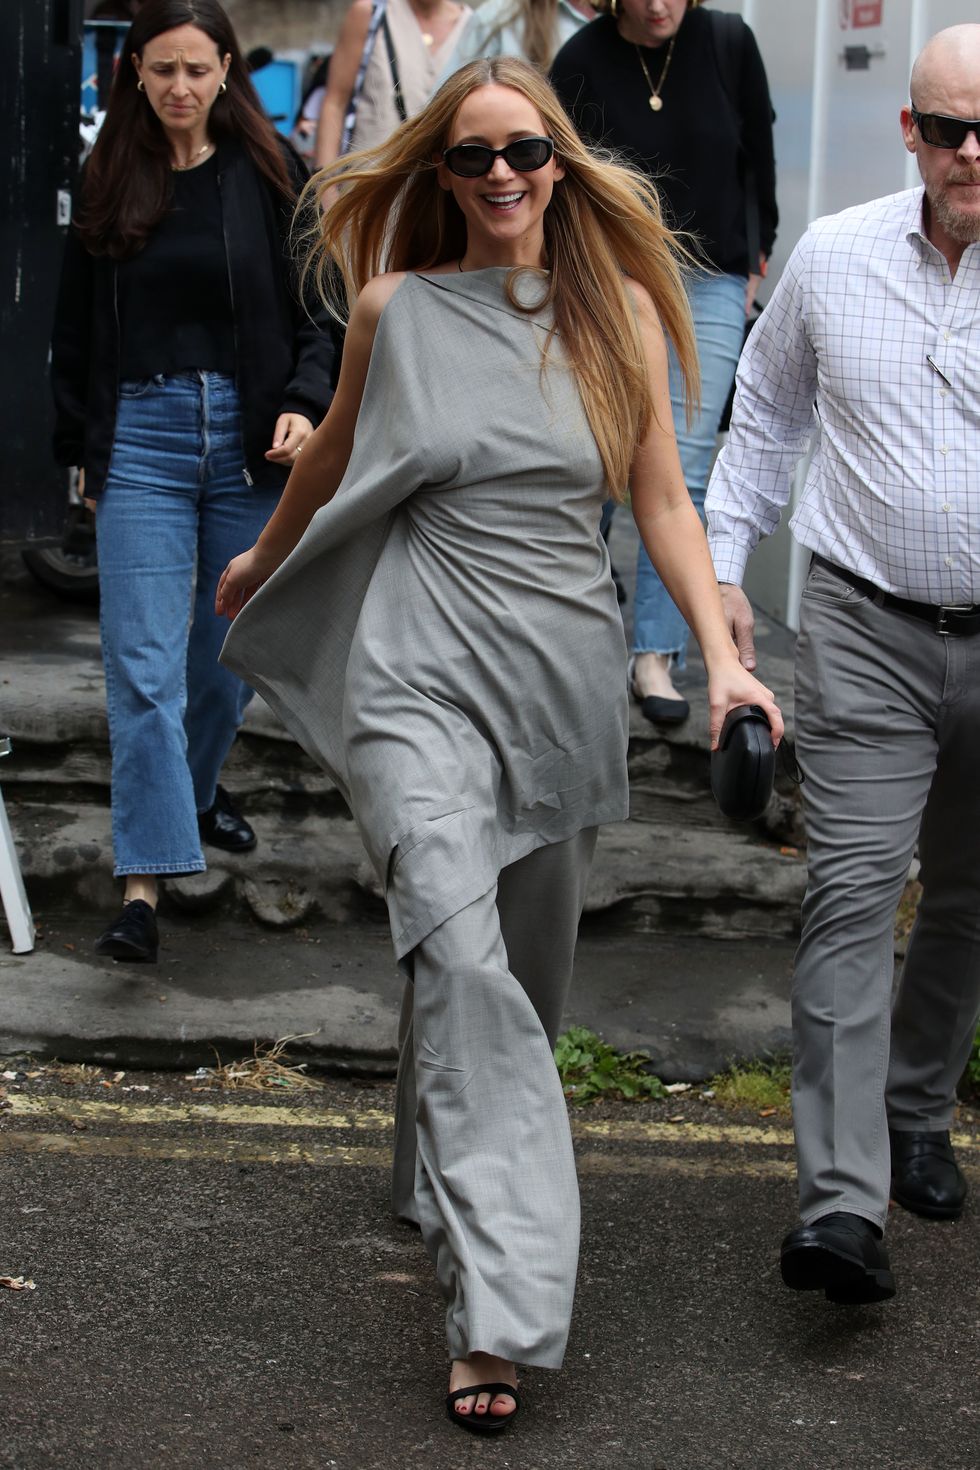 london, united kingdom june 12 jennifer lawrence is seen out and about on june 12, 2023 in london, united kingdom photo by megagc images